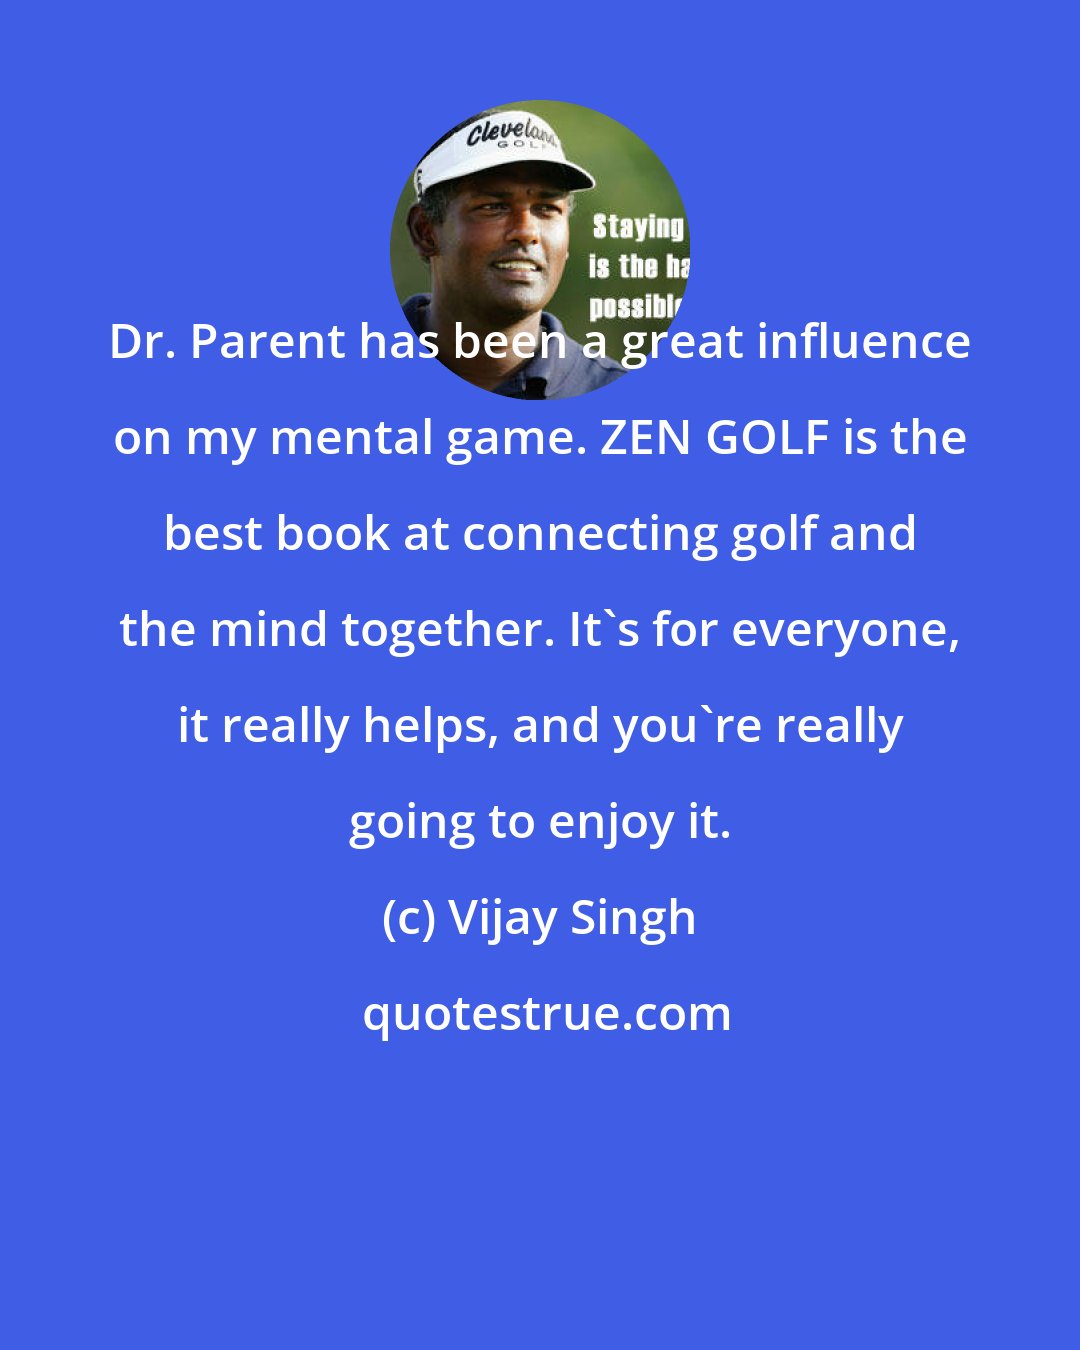 Vijay Singh: Dr. Parent has been a great influence on my mental game. ZEN GOLF is the best book at connecting golf and the mind together. It's for everyone, it really helps, and you're really going to enjoy it.